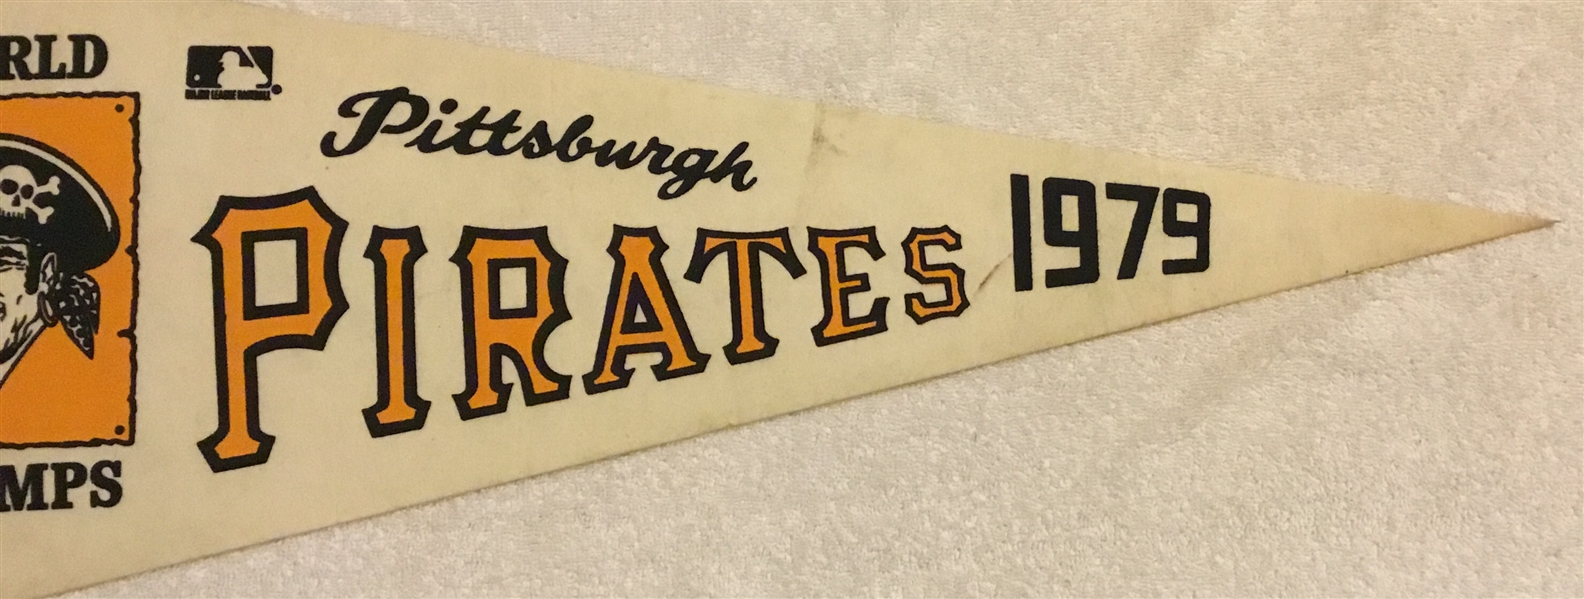 1979 PITTSBURGH PIRATES WORLD CHAMPS PENNANT